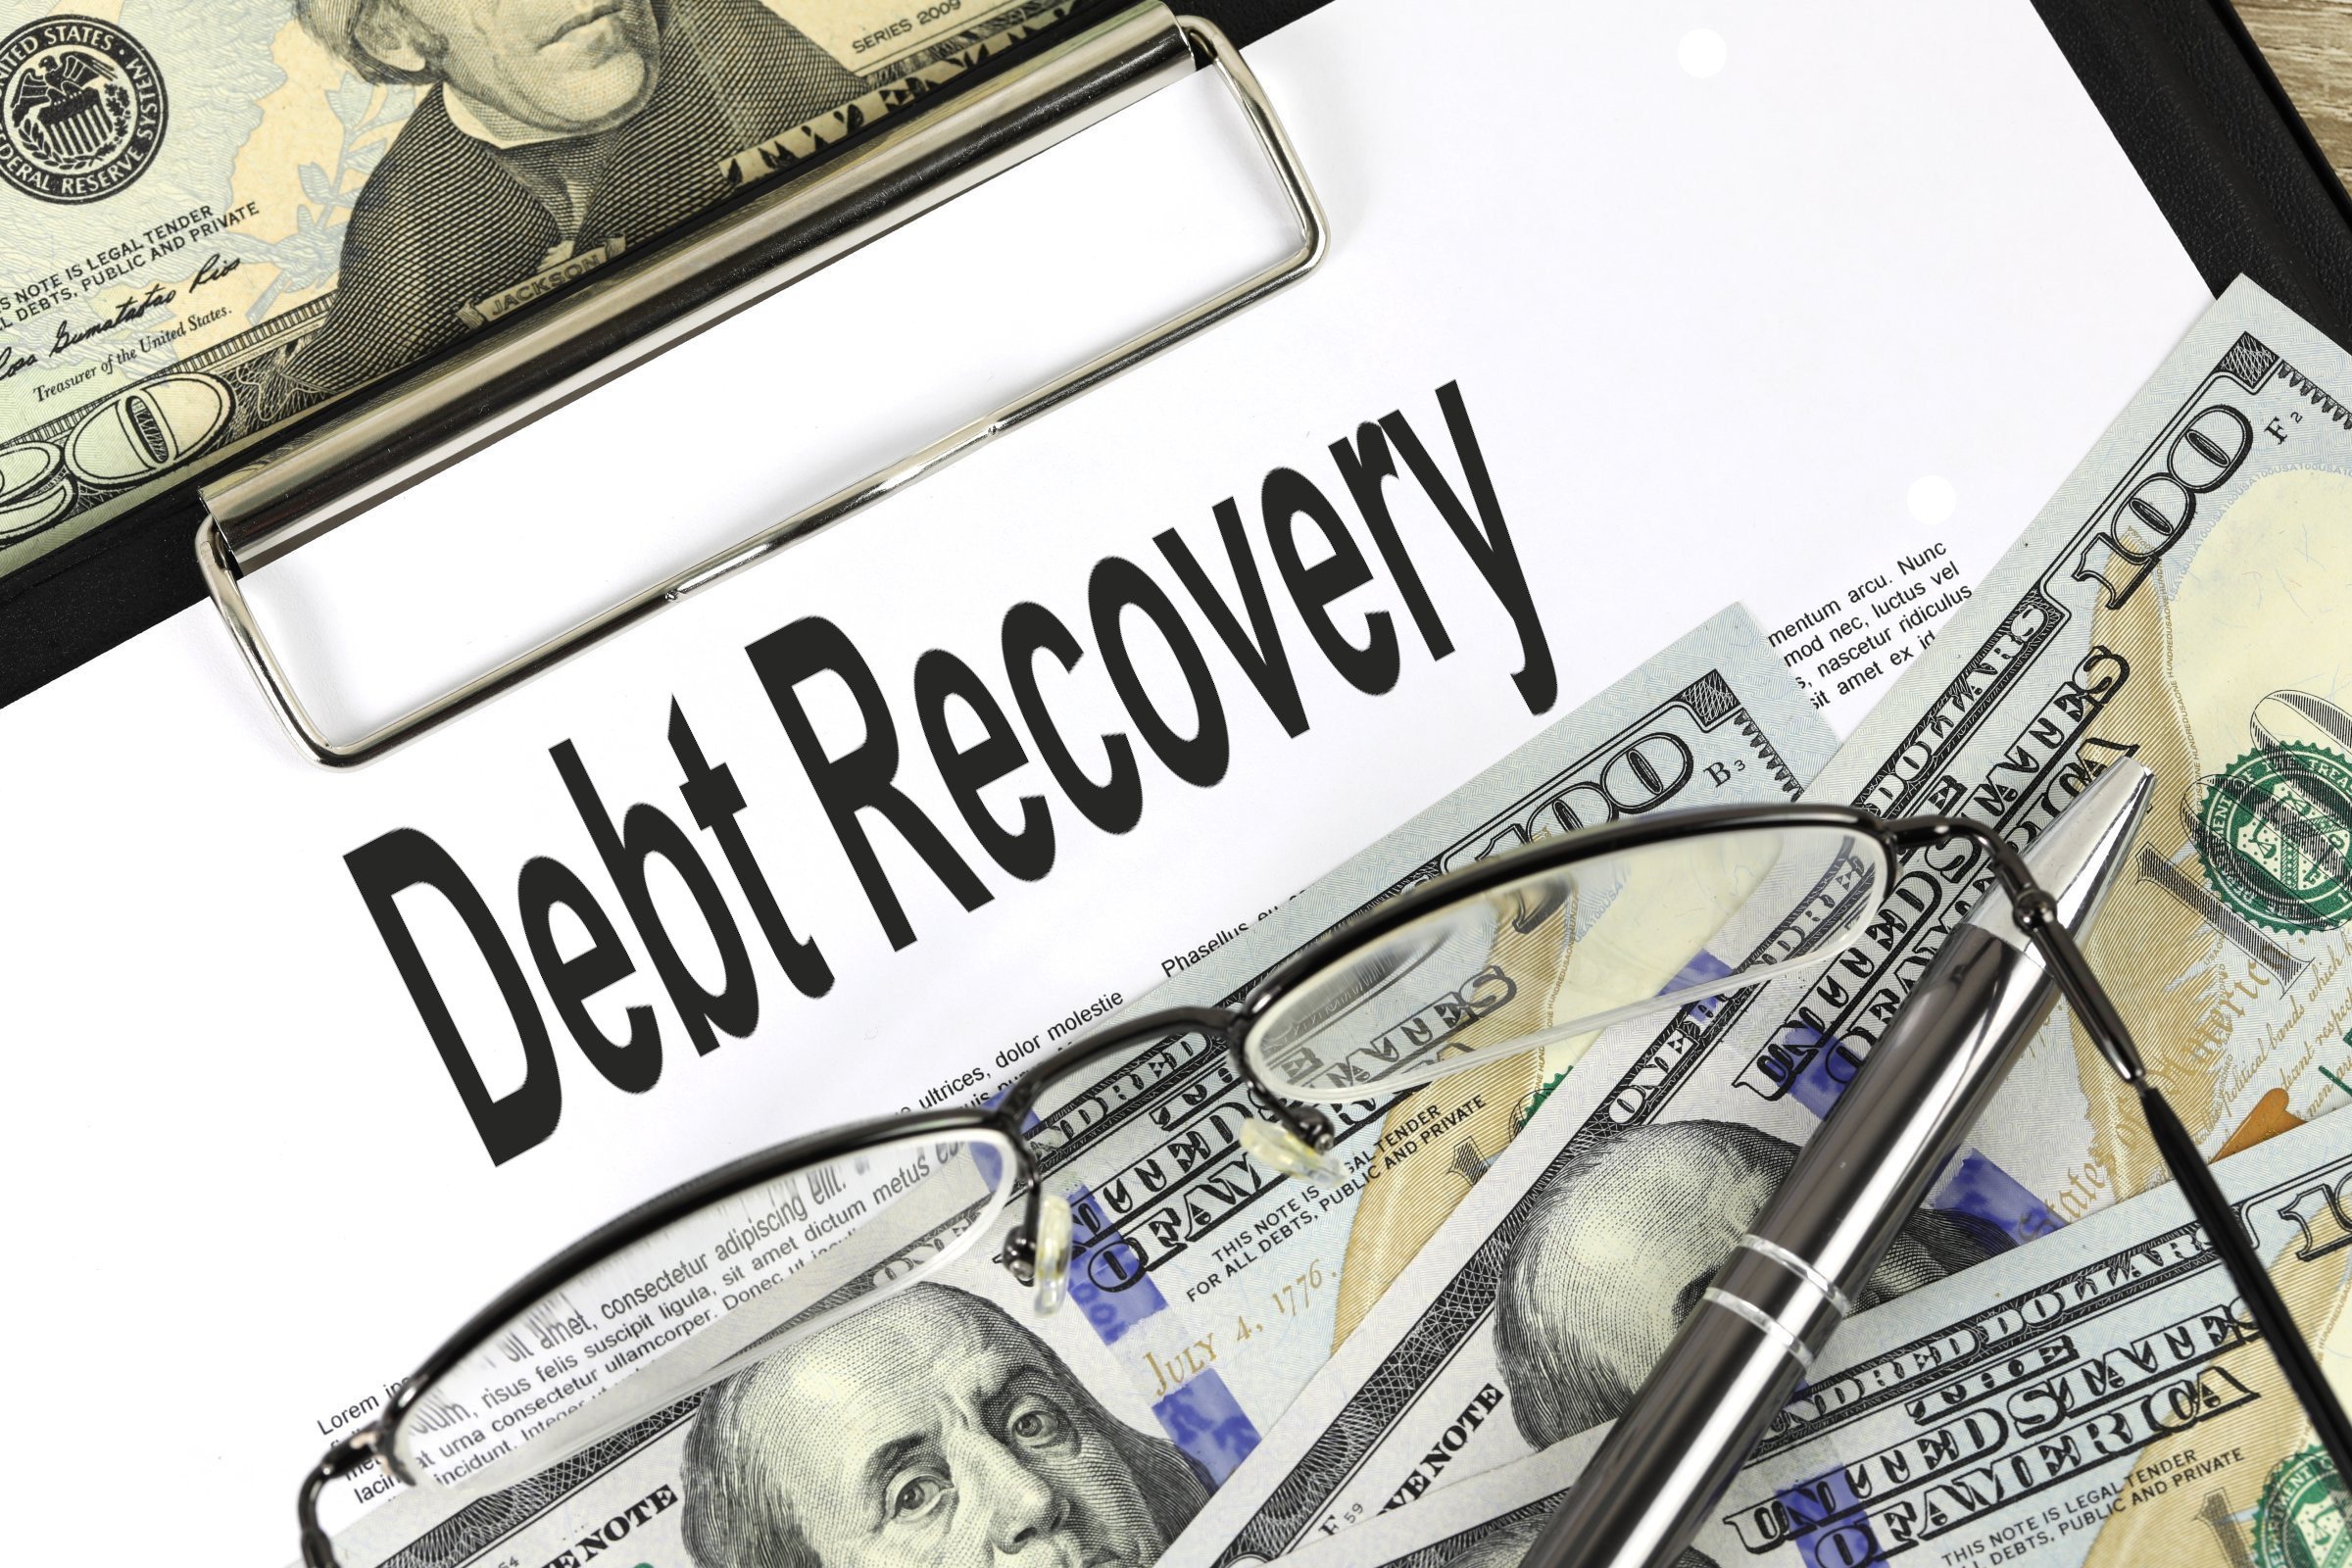 debt recovery